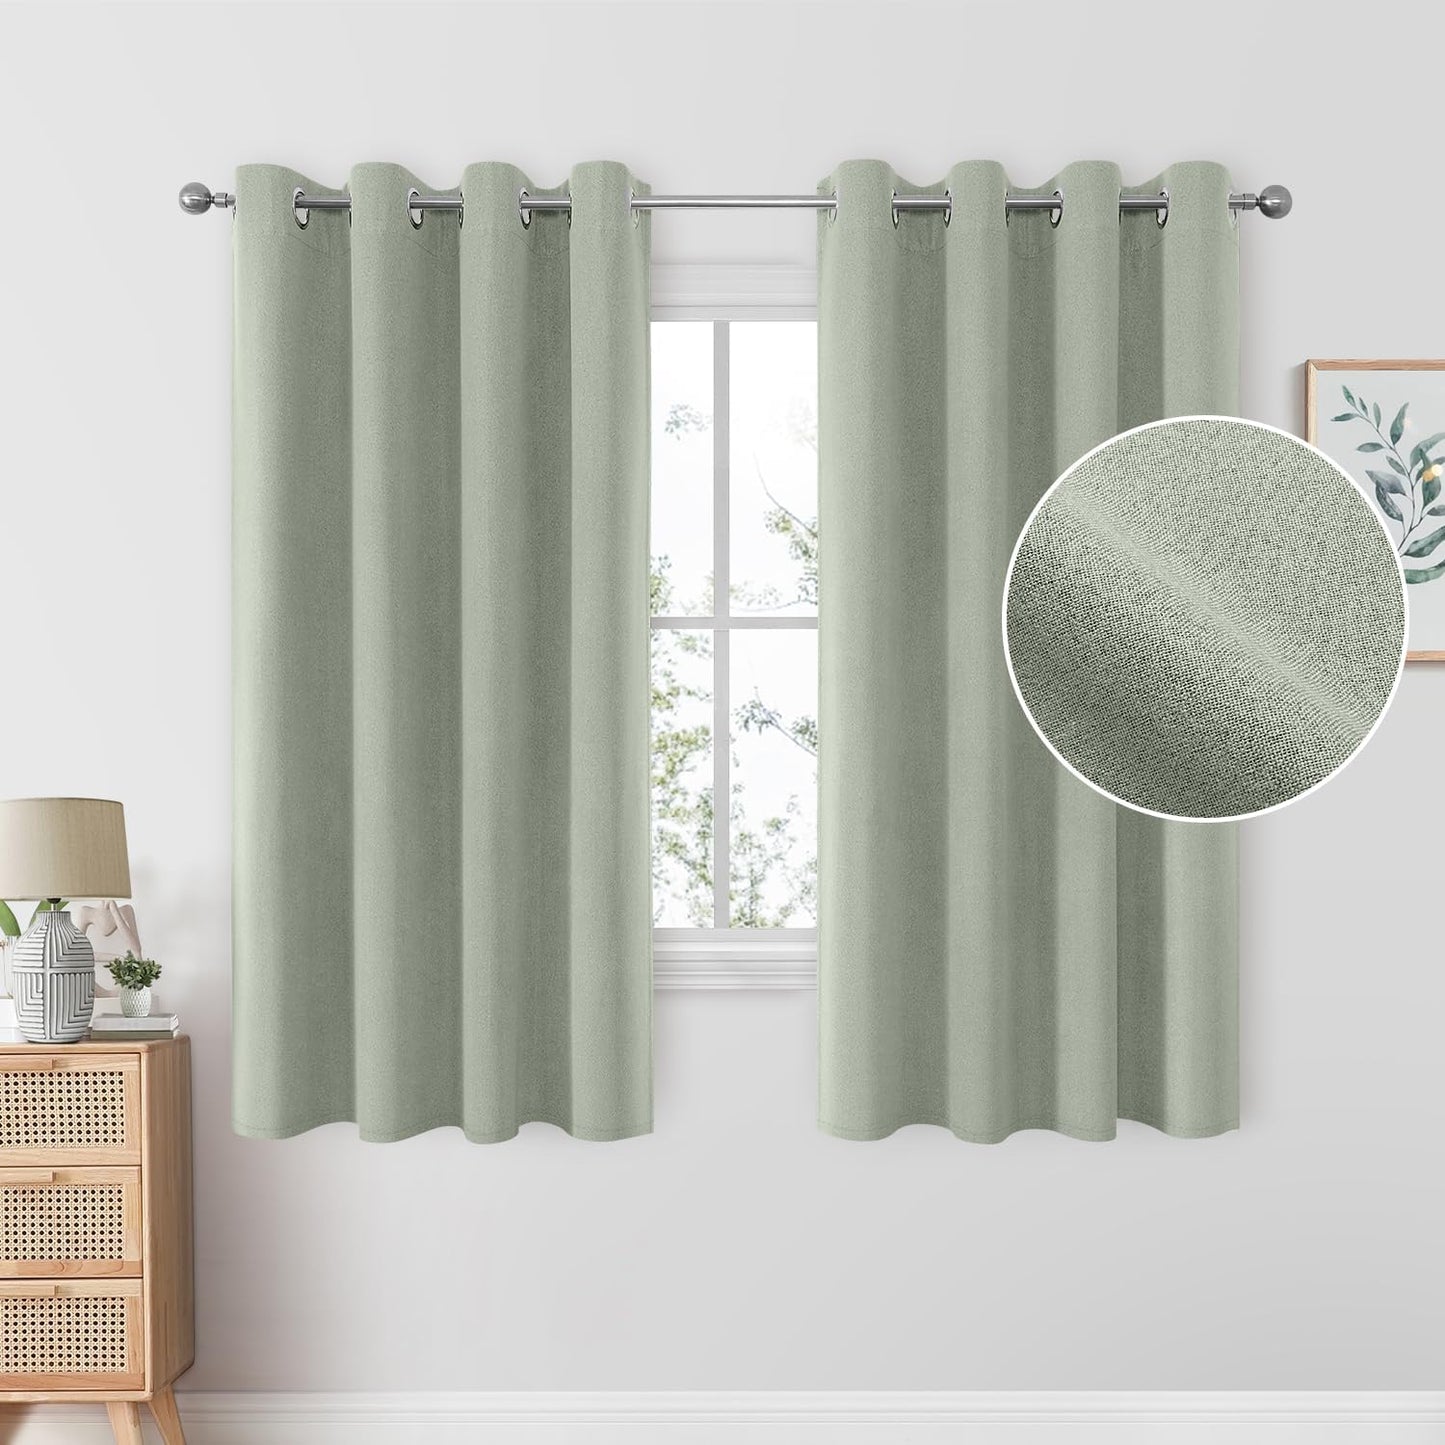 HOMEIDEAS 100% Blush Pink Linen Blackout Curtains for Bedroom, 52 X 84 Inch Room Darkening Curtains for Living, Faux Linen Thermal Insulated Full Black Out Grommet Window Curtains/Drapes  HOMEIDEAS Sage Green W52" X L63" 